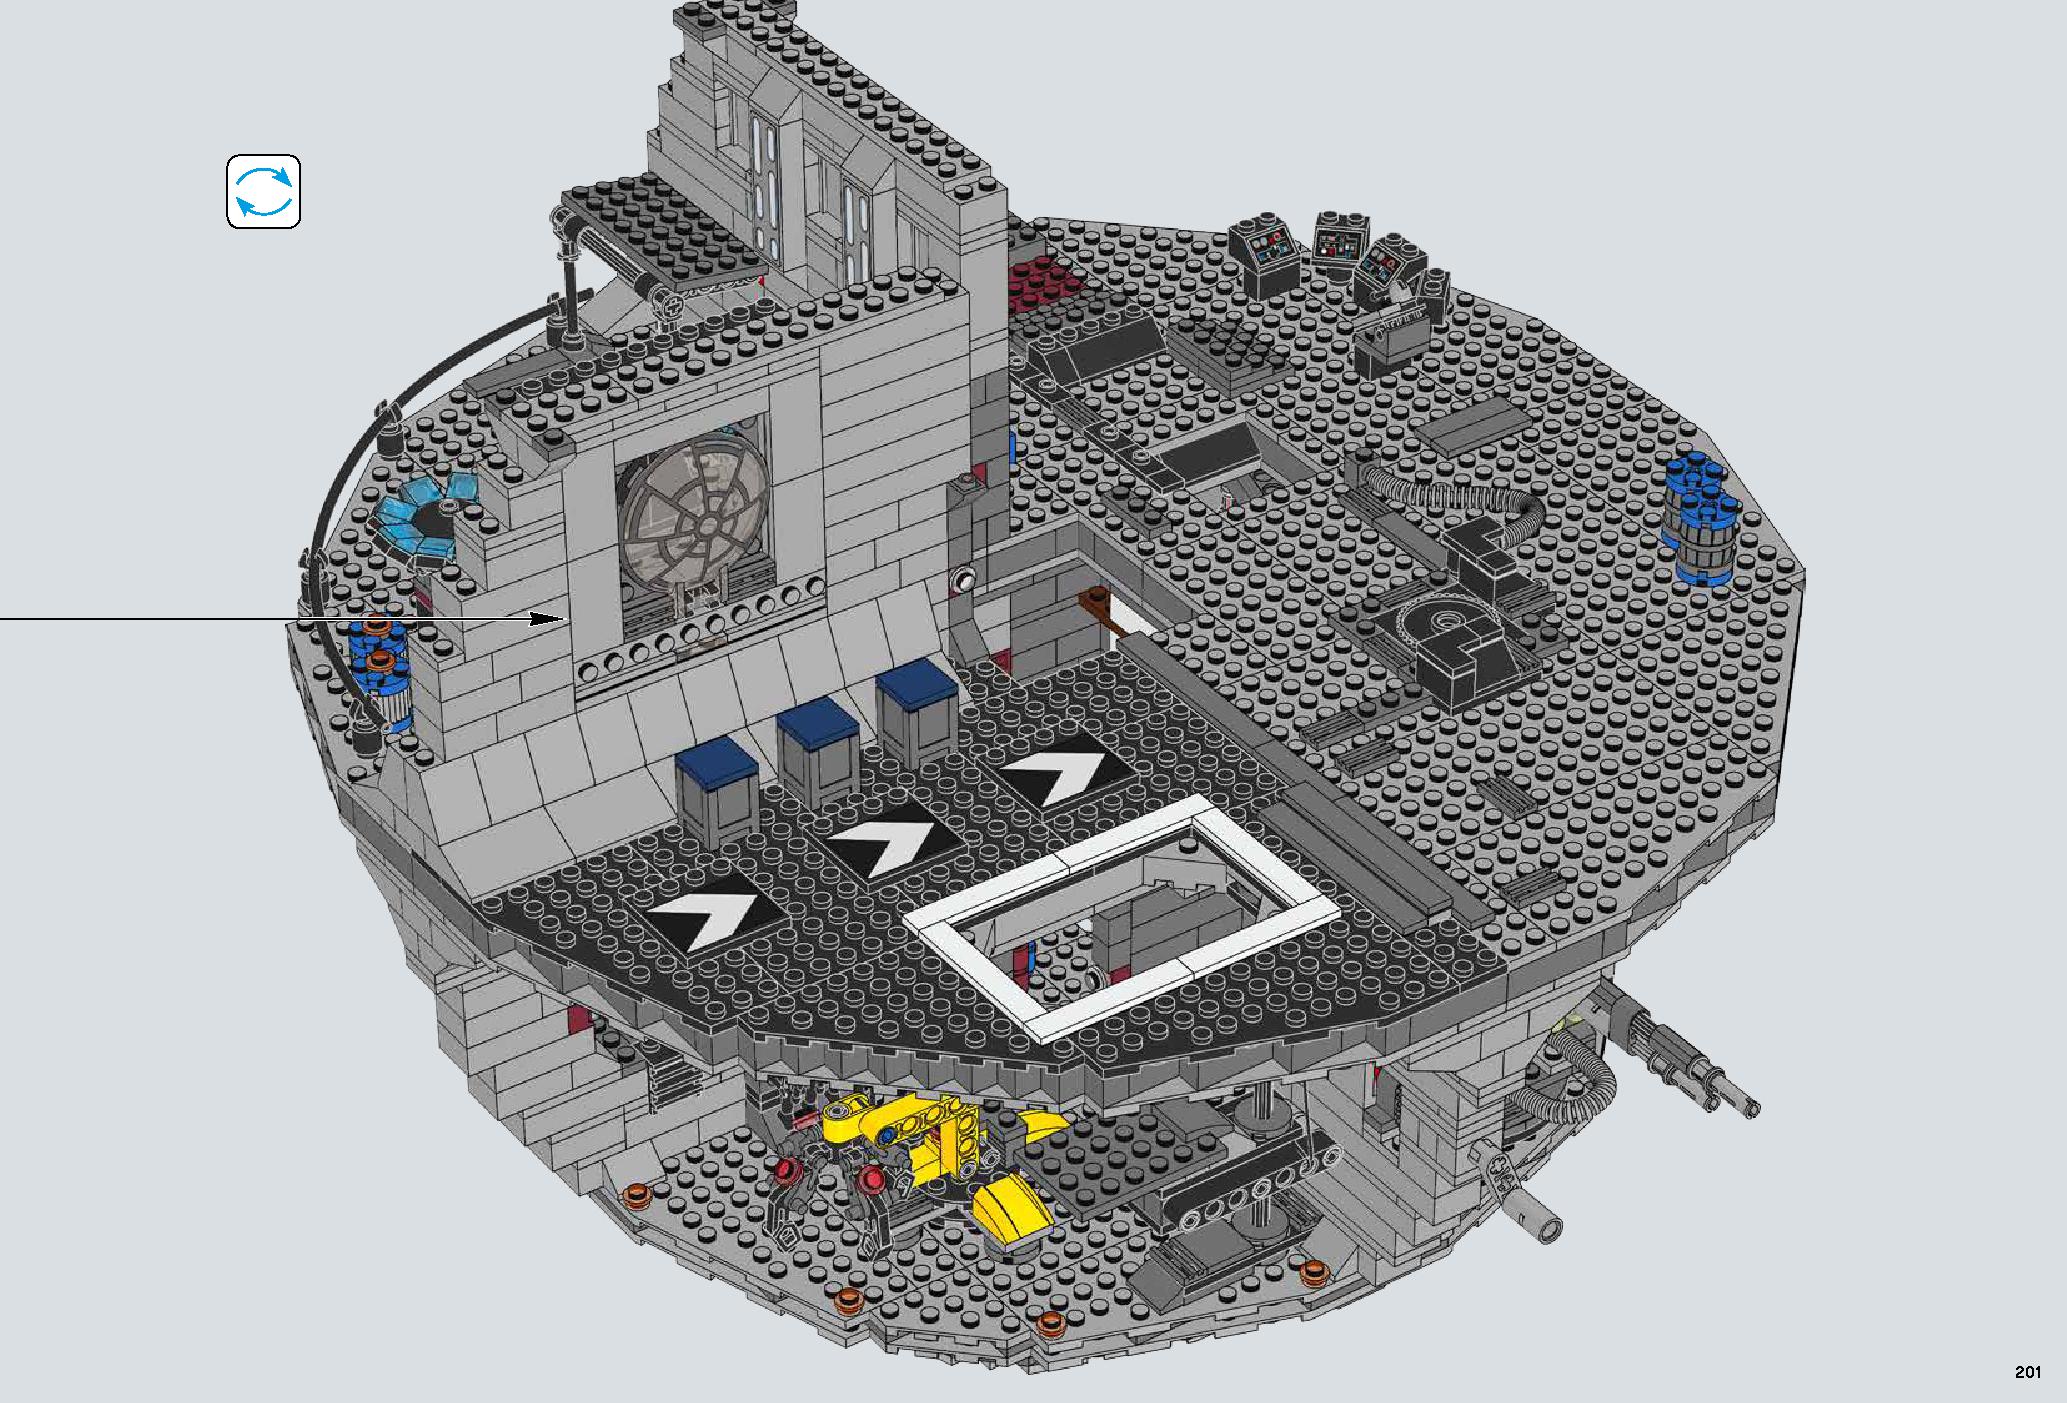 Death Star 75159 LEGO information LEGO instructions 201 page